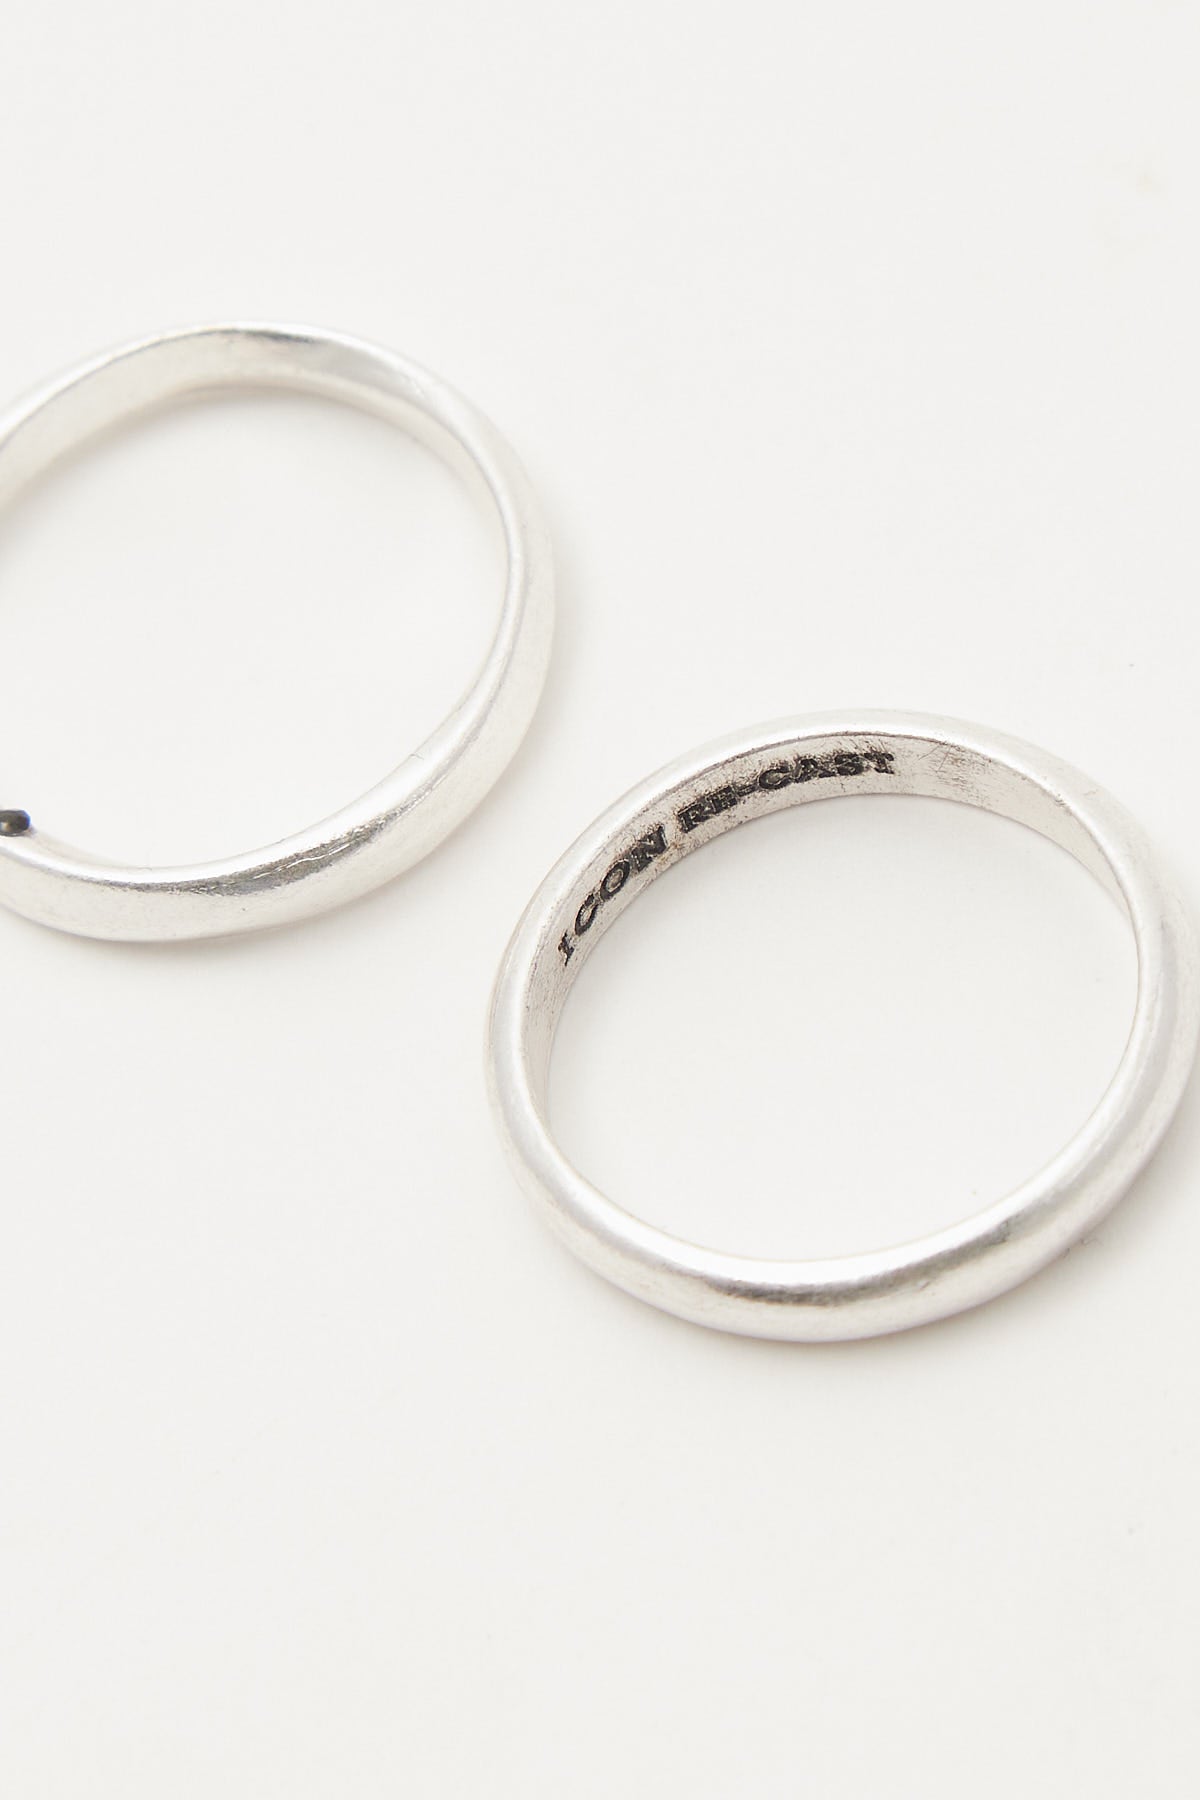 Icon Brand Re-Cast Double Ring Band Silver